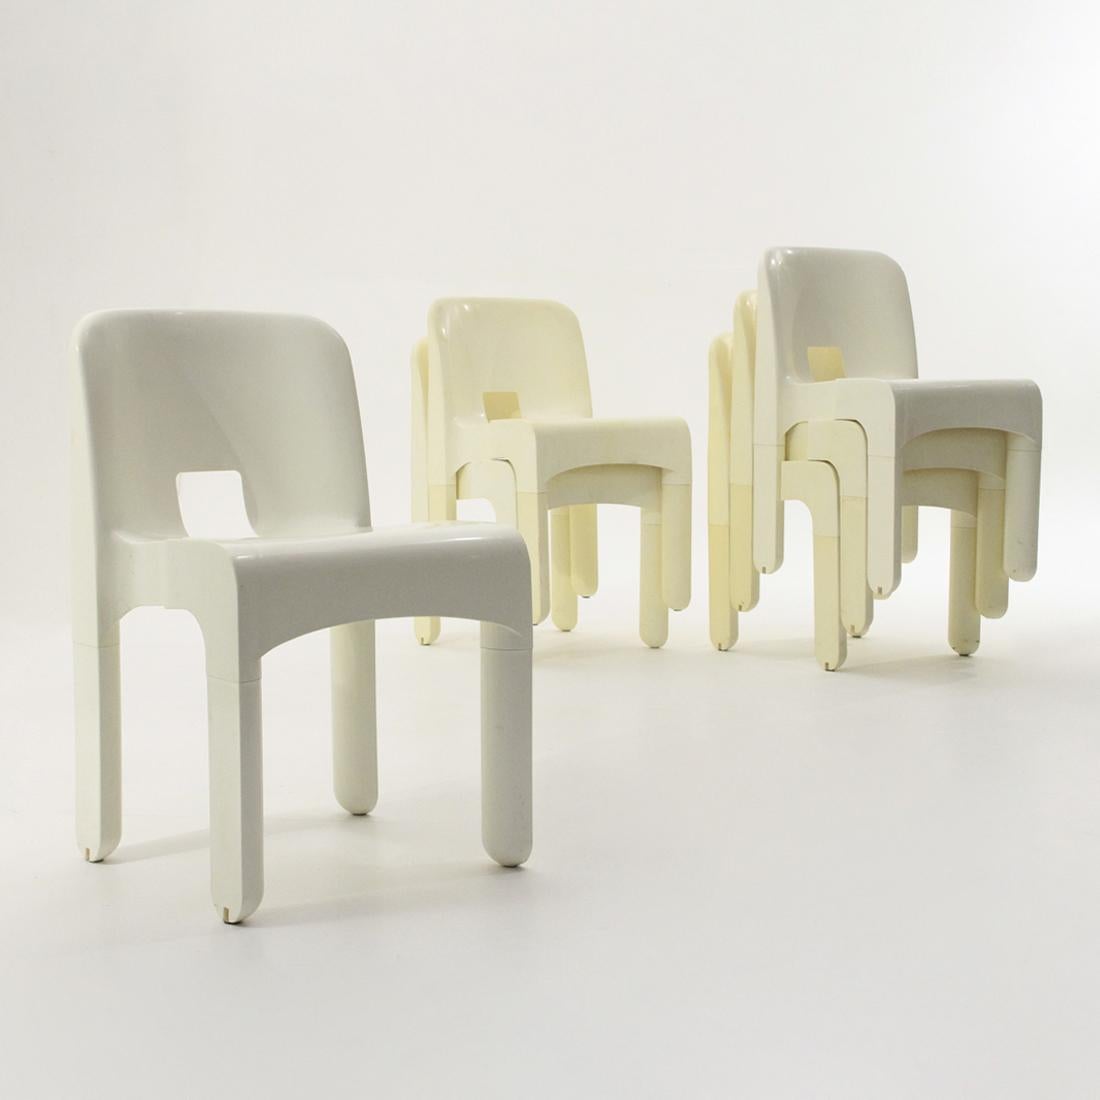 Six chairs produced in the 1960s by Kartell to a design by Joe Colombo.
Unibody structure in ABS.
ABS legs with rubber feet.
Structure in good condition, halos and marks due to normal use over time.

Dimensions: Length 42 cm, depth 50 cm,